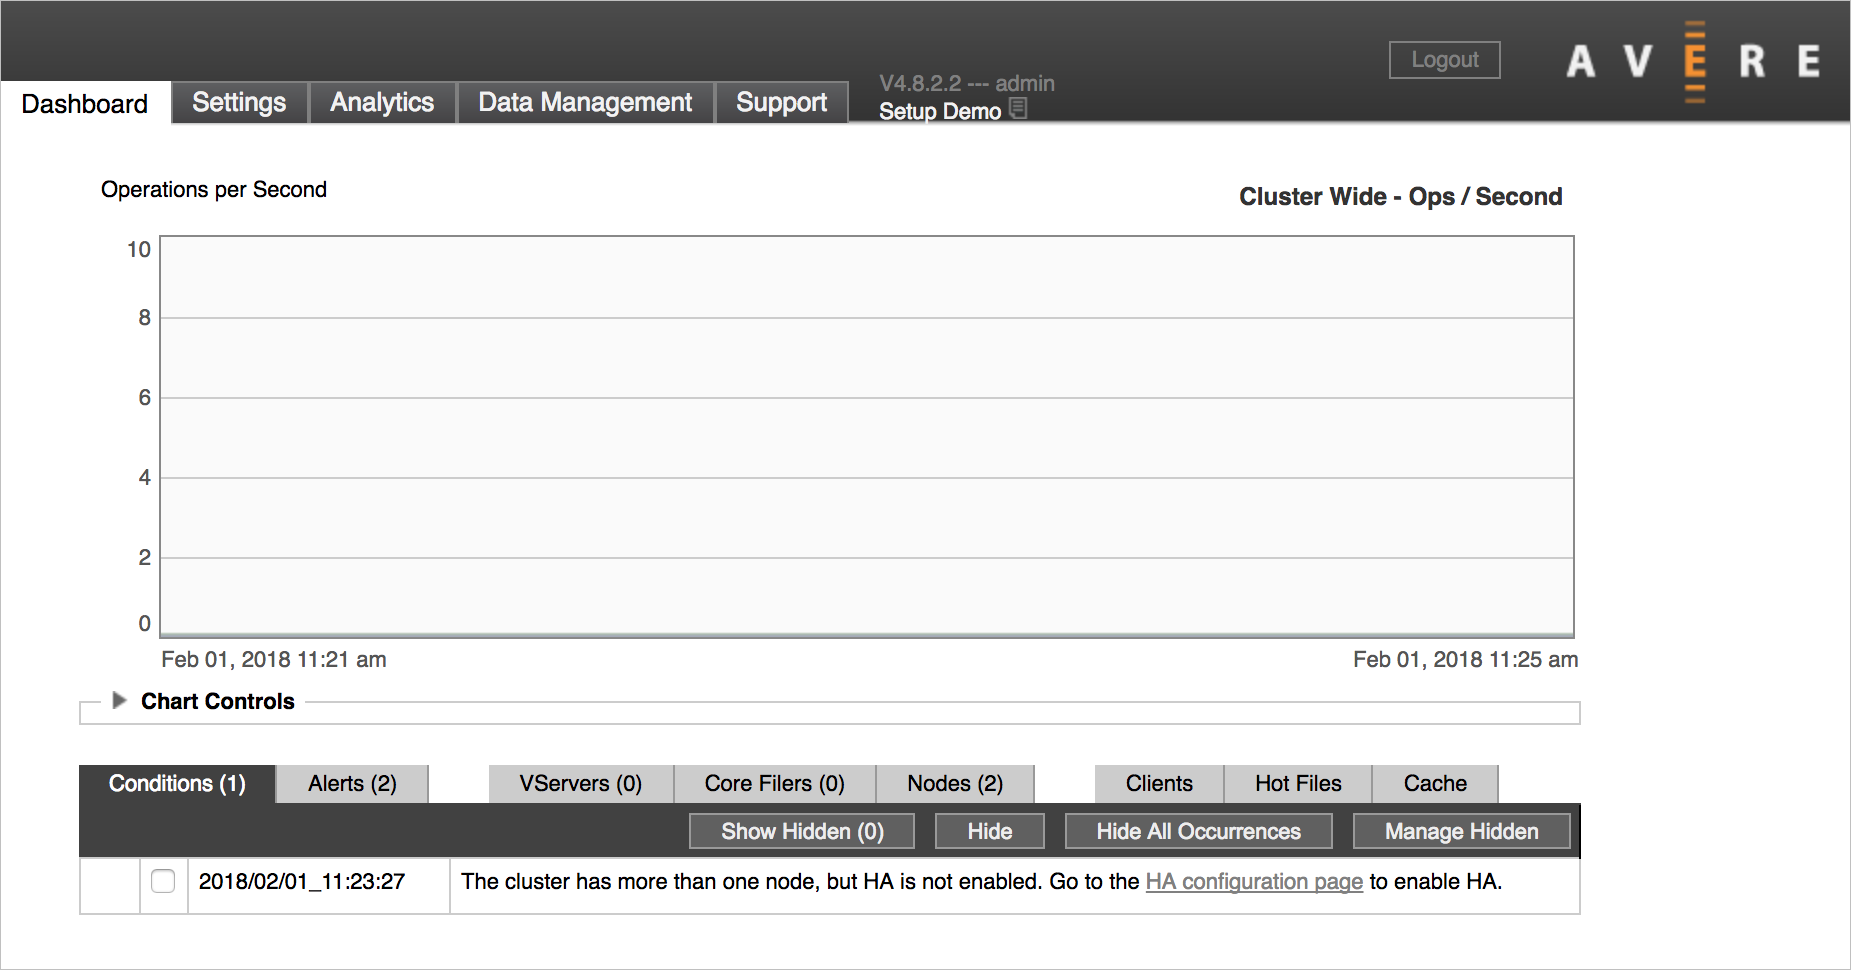 Dashboard tab with the message "The cluster has more than one node, but HA is not enabled ..." in the Conditions table